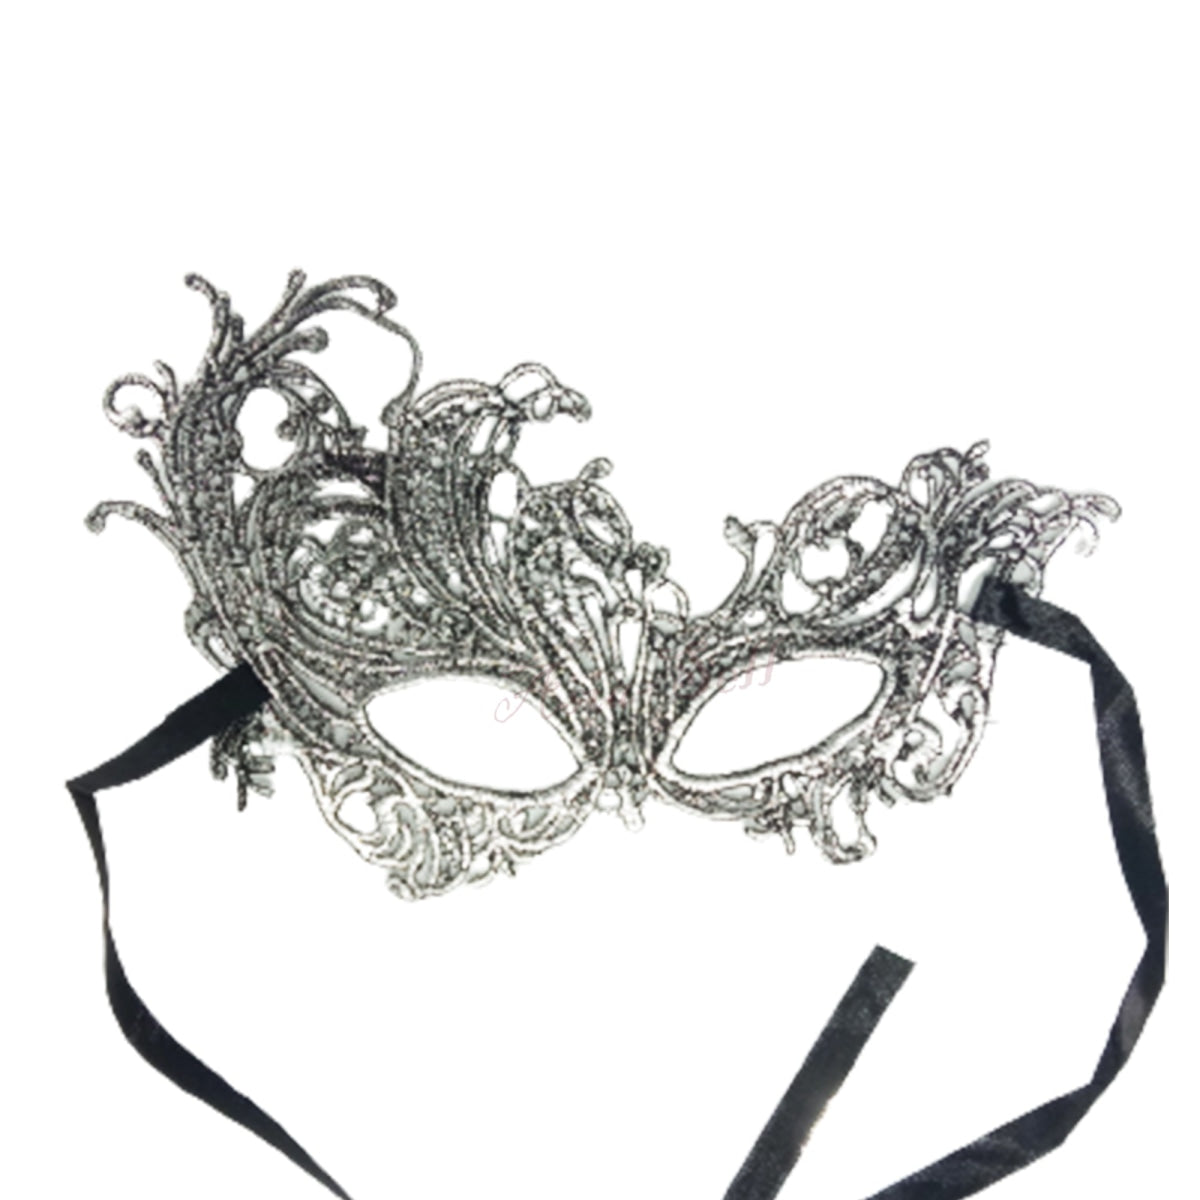 Eye Mask Sexy Lace Venetian Masquerade Ball Halloween Party Fancy Dress Costume Silver Masks